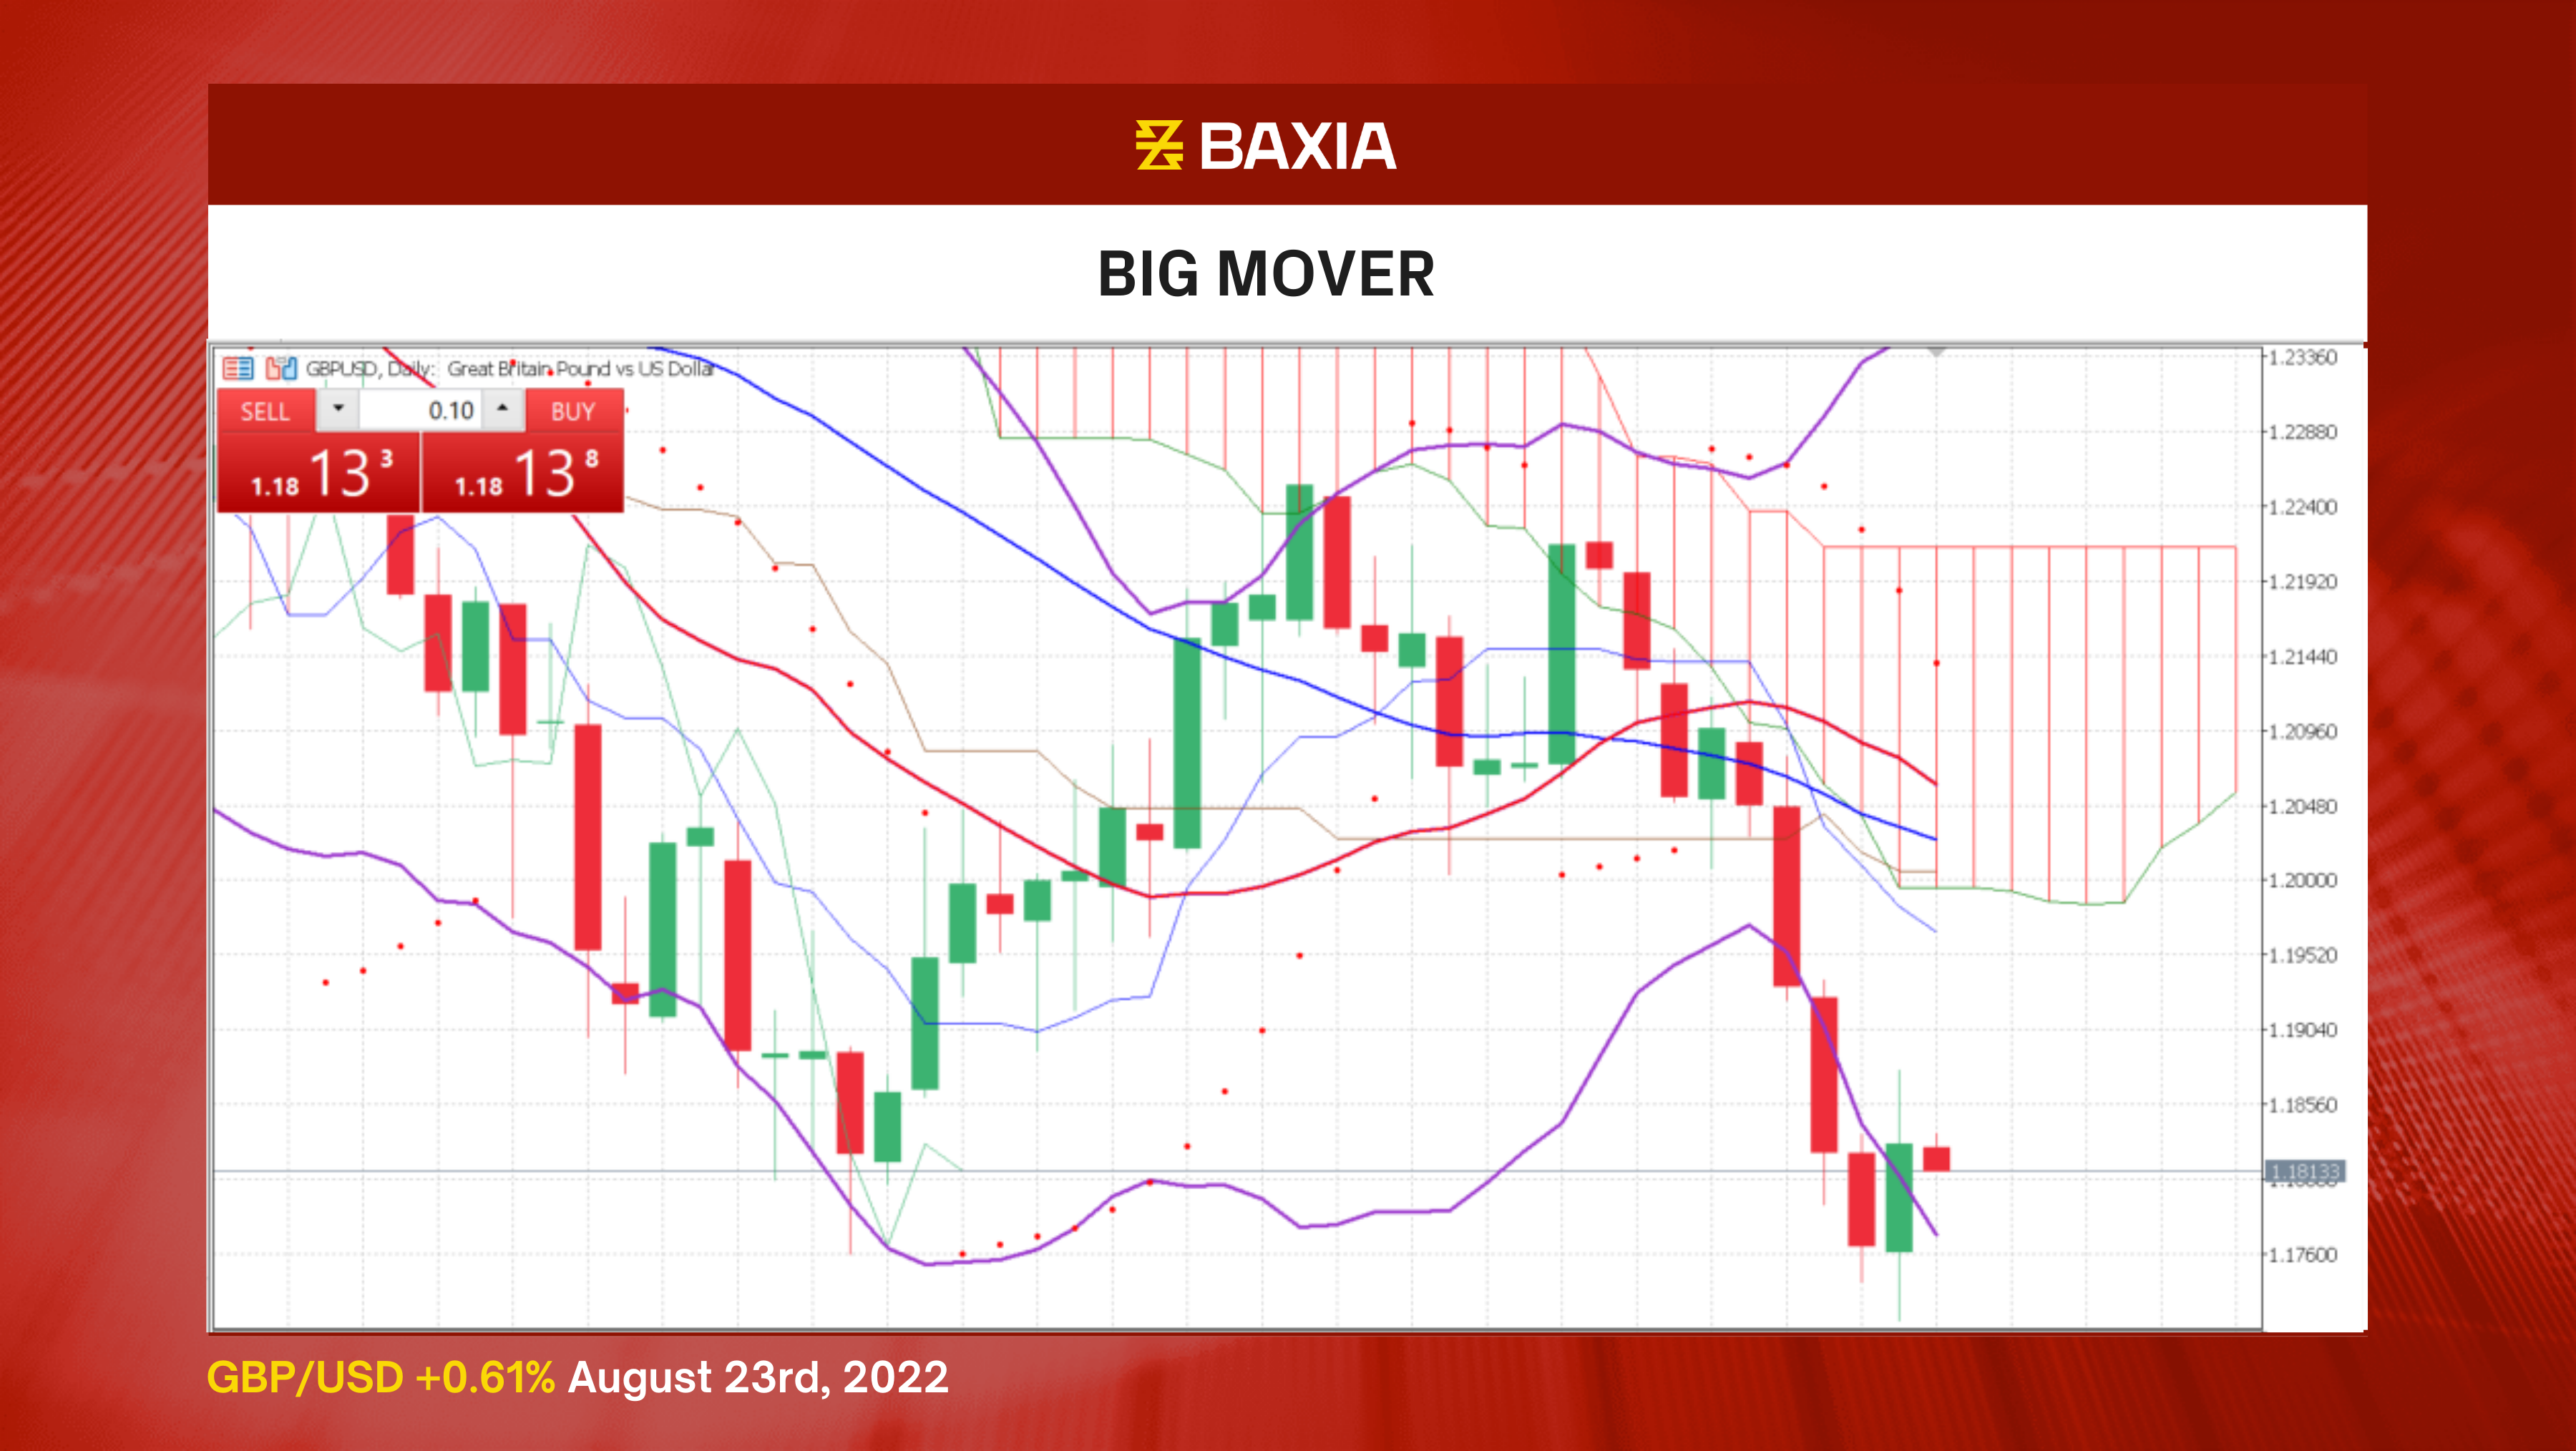 TW_Big Mover - Red AIG (1)